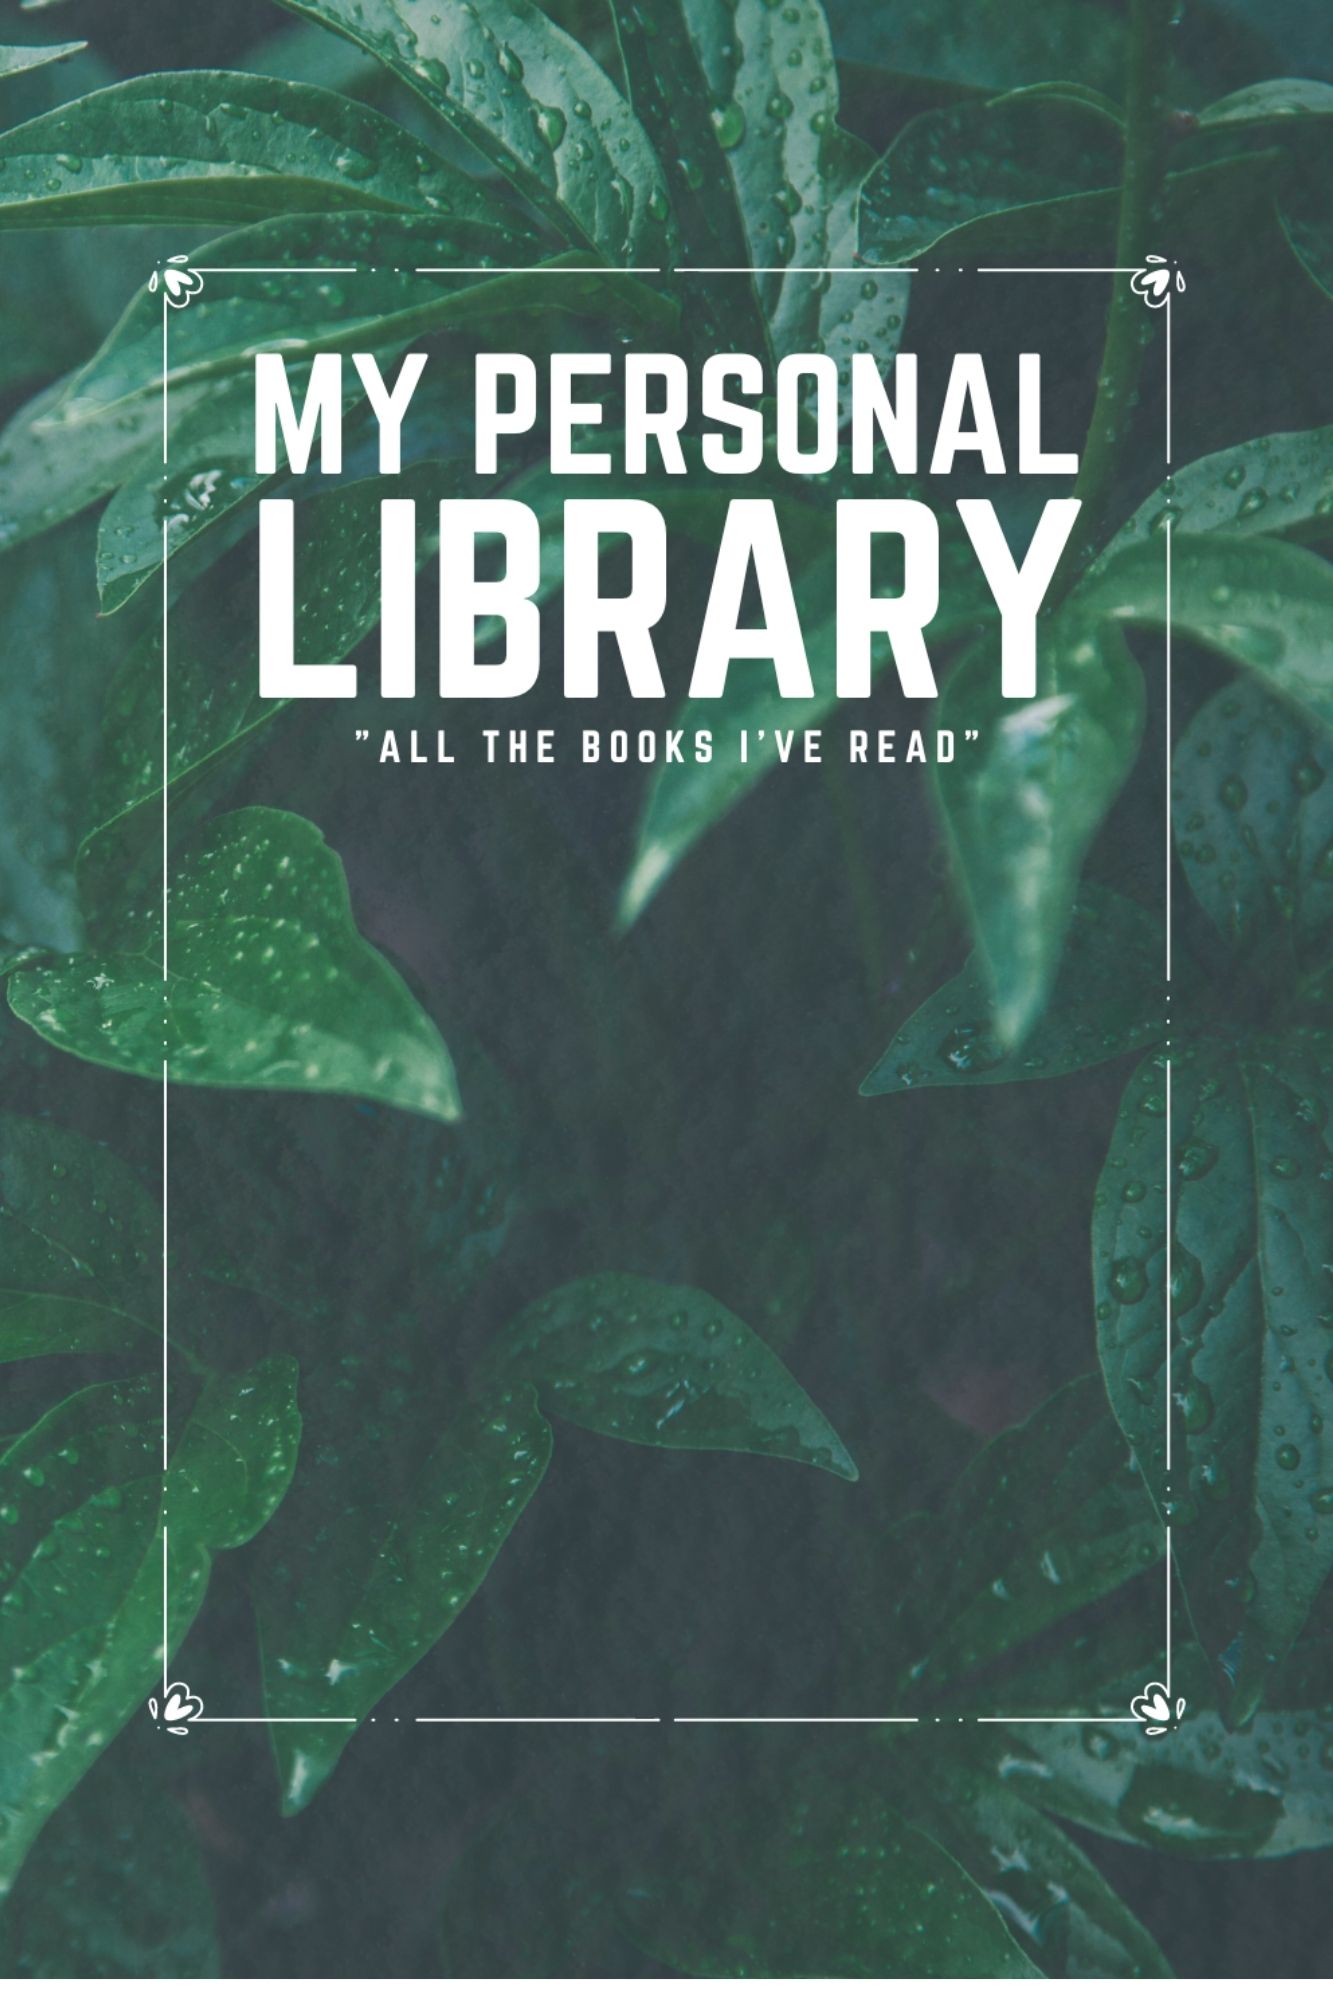 Reading Journal - My Personal Library "All The Books I have Read"